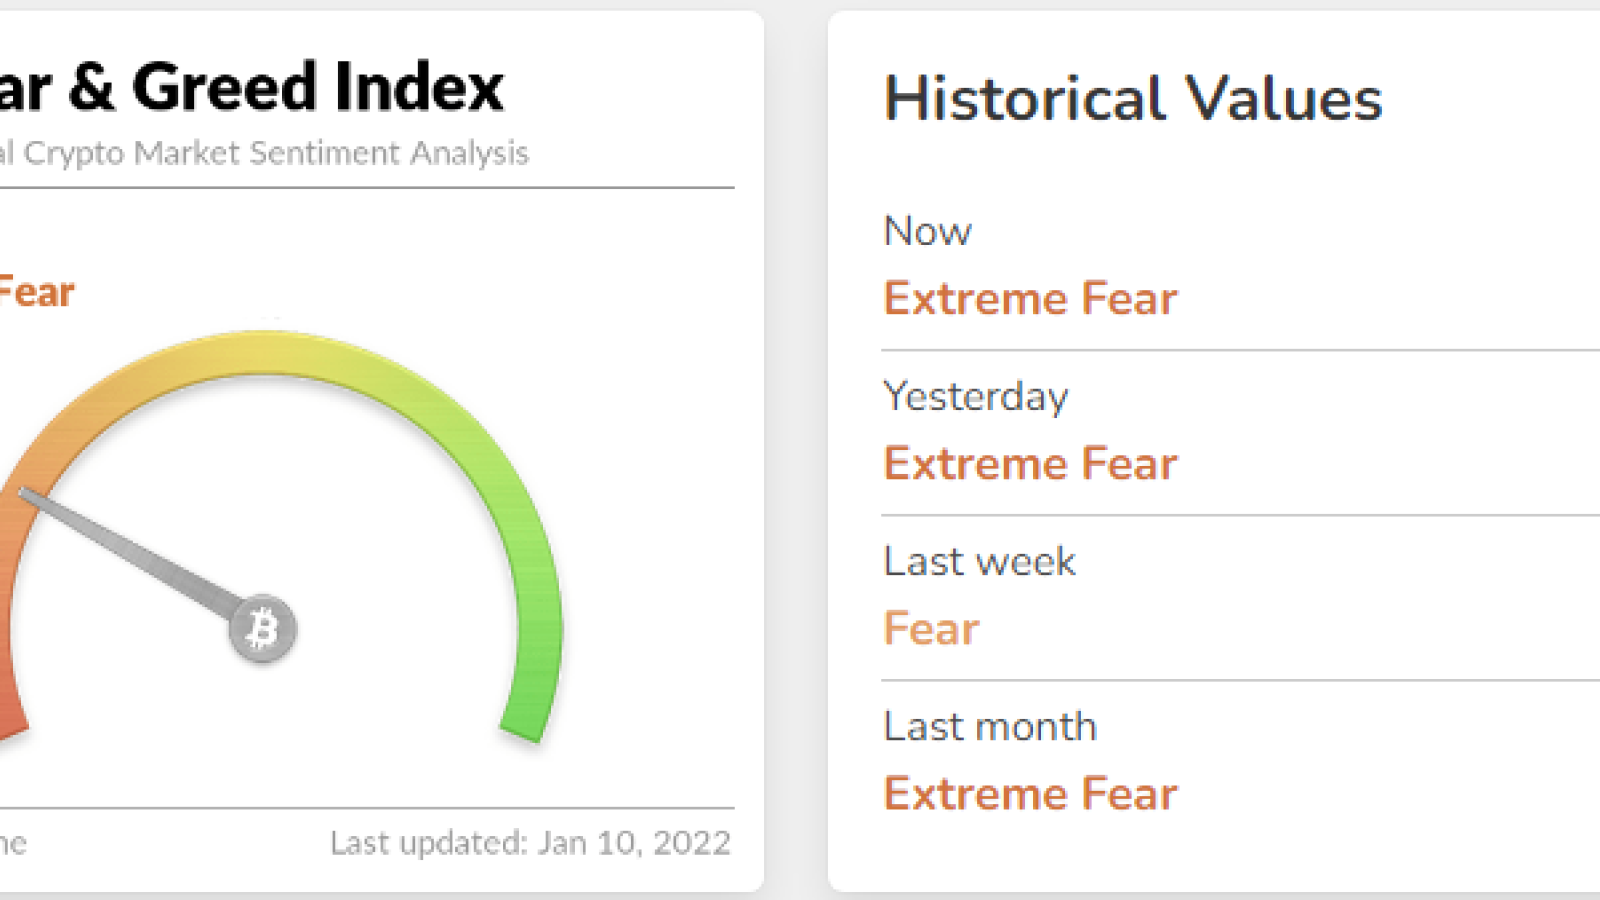 crypto fear and greed index